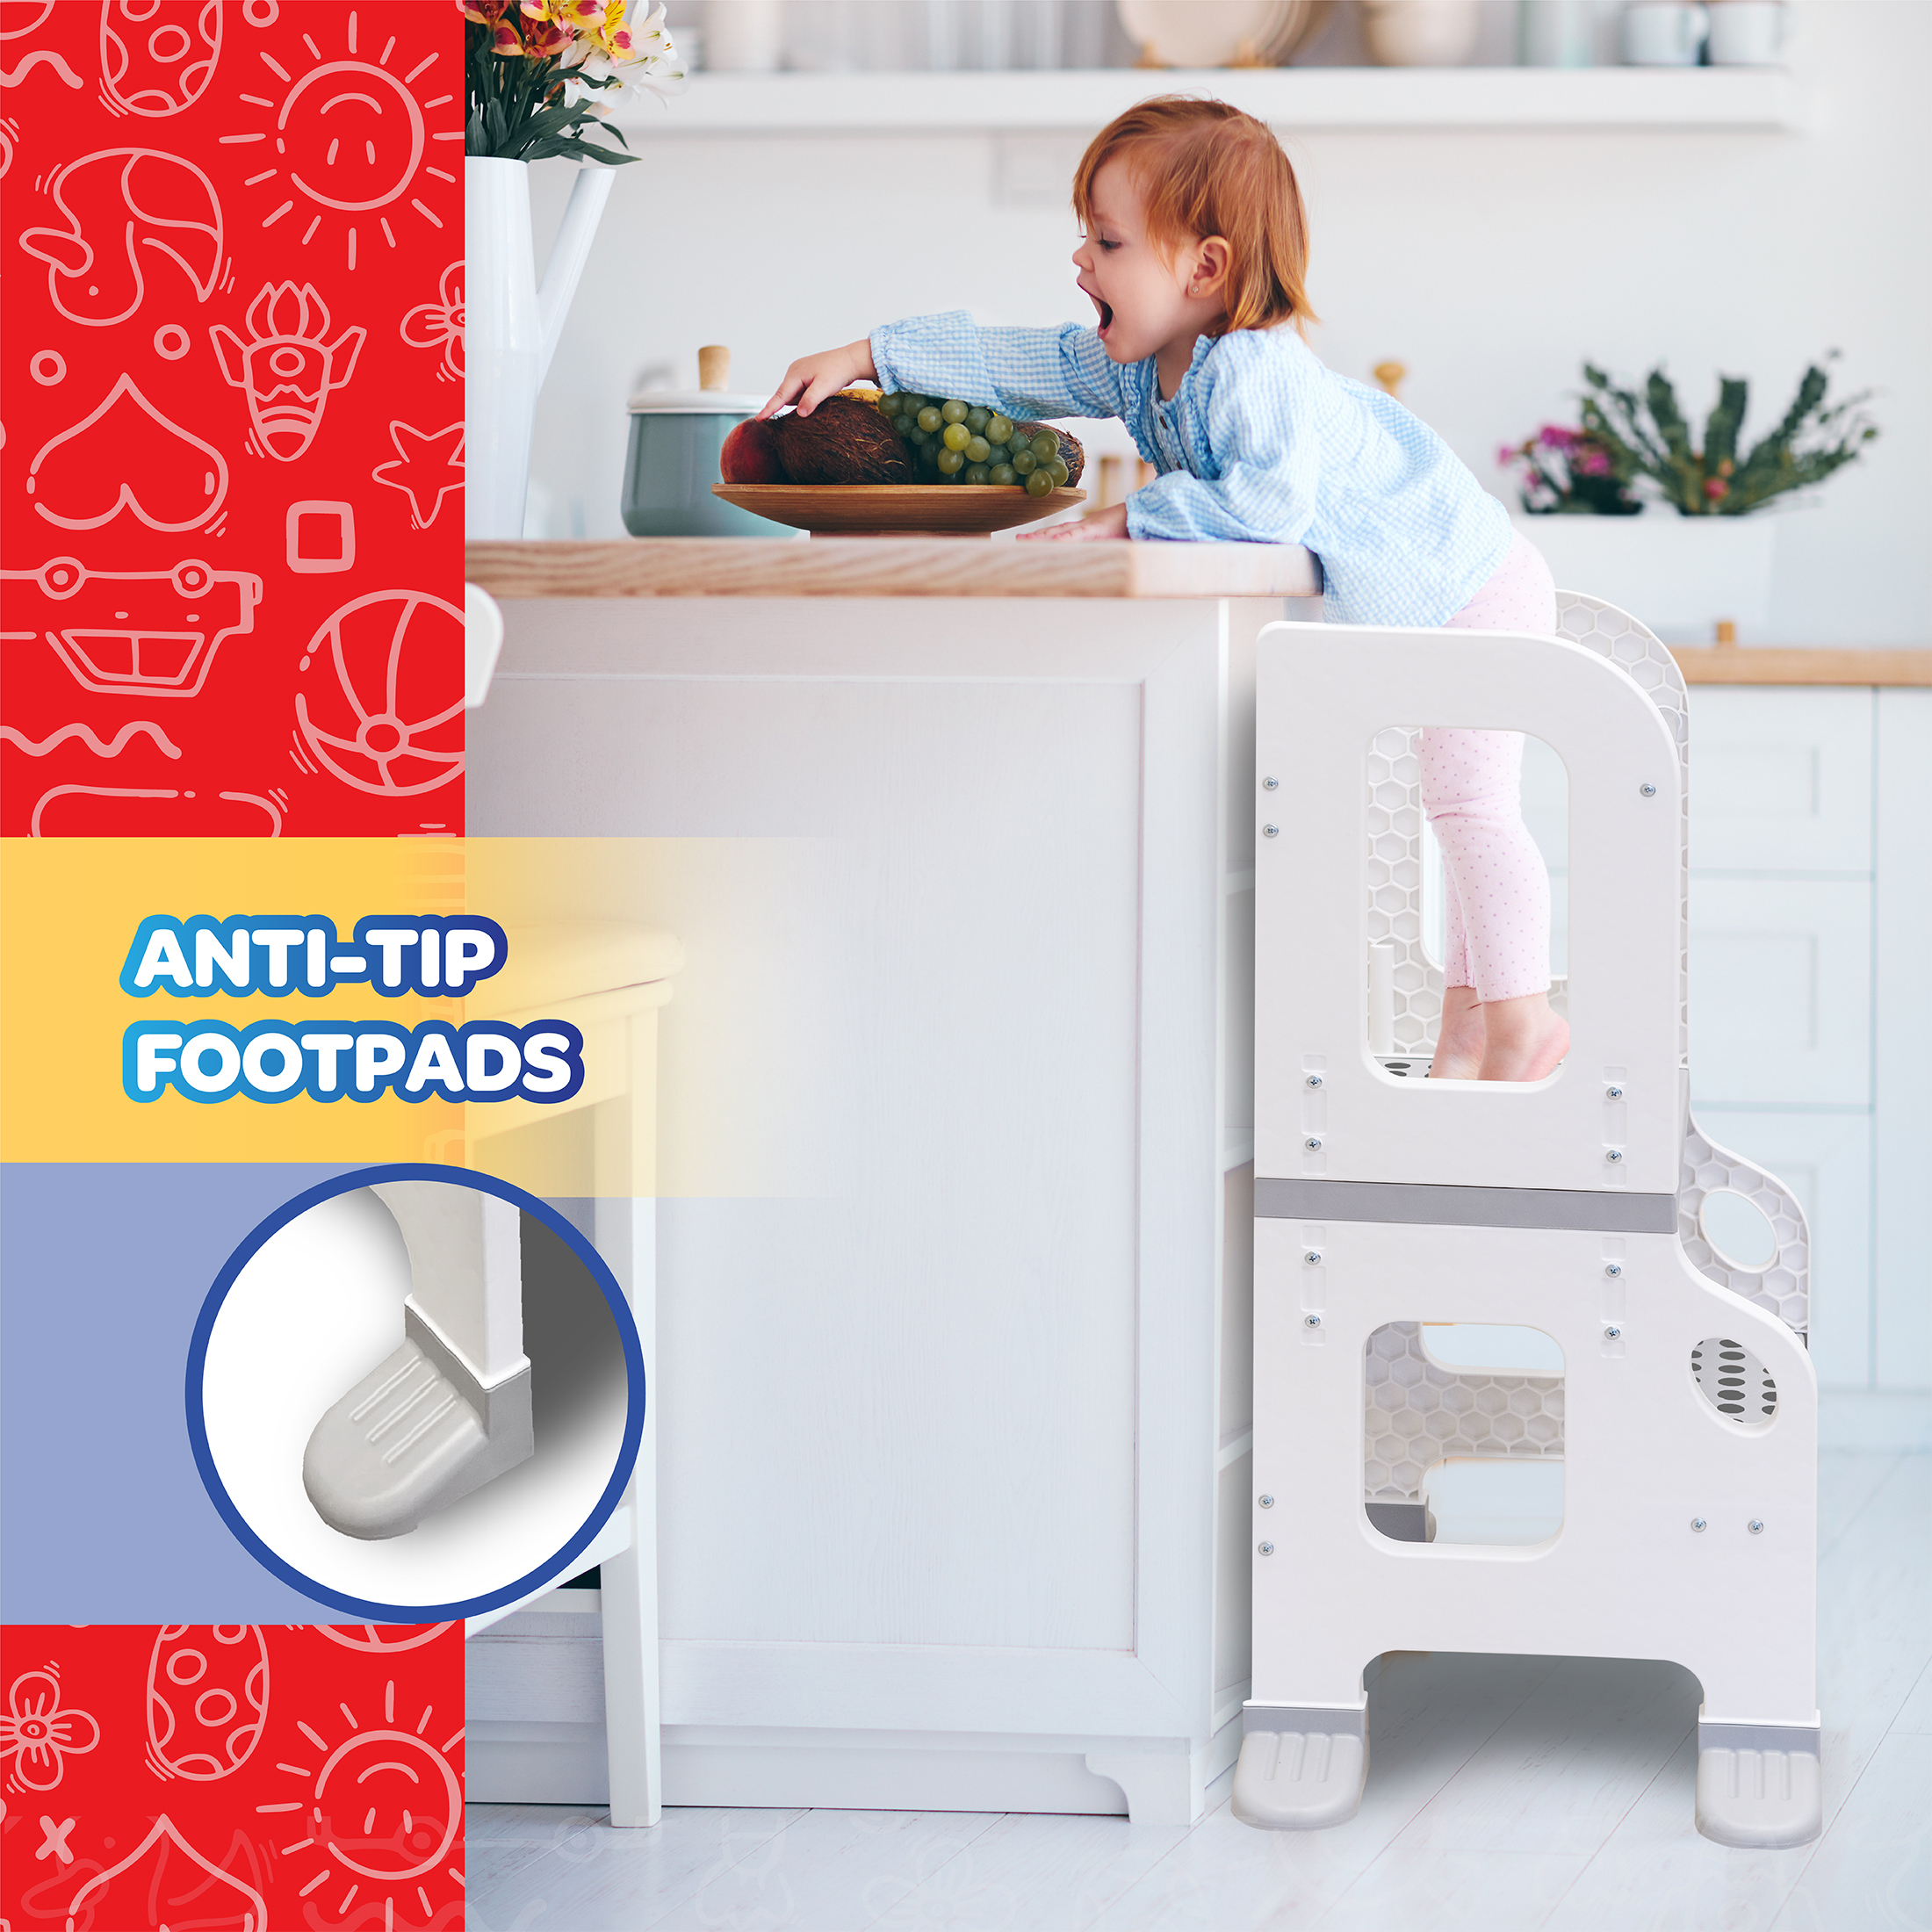 CORE PACIFIC Kitchen Buddy 2-in-1 Stool for Ages 1-3 safe up to 100 lbs. - image 4 of 7